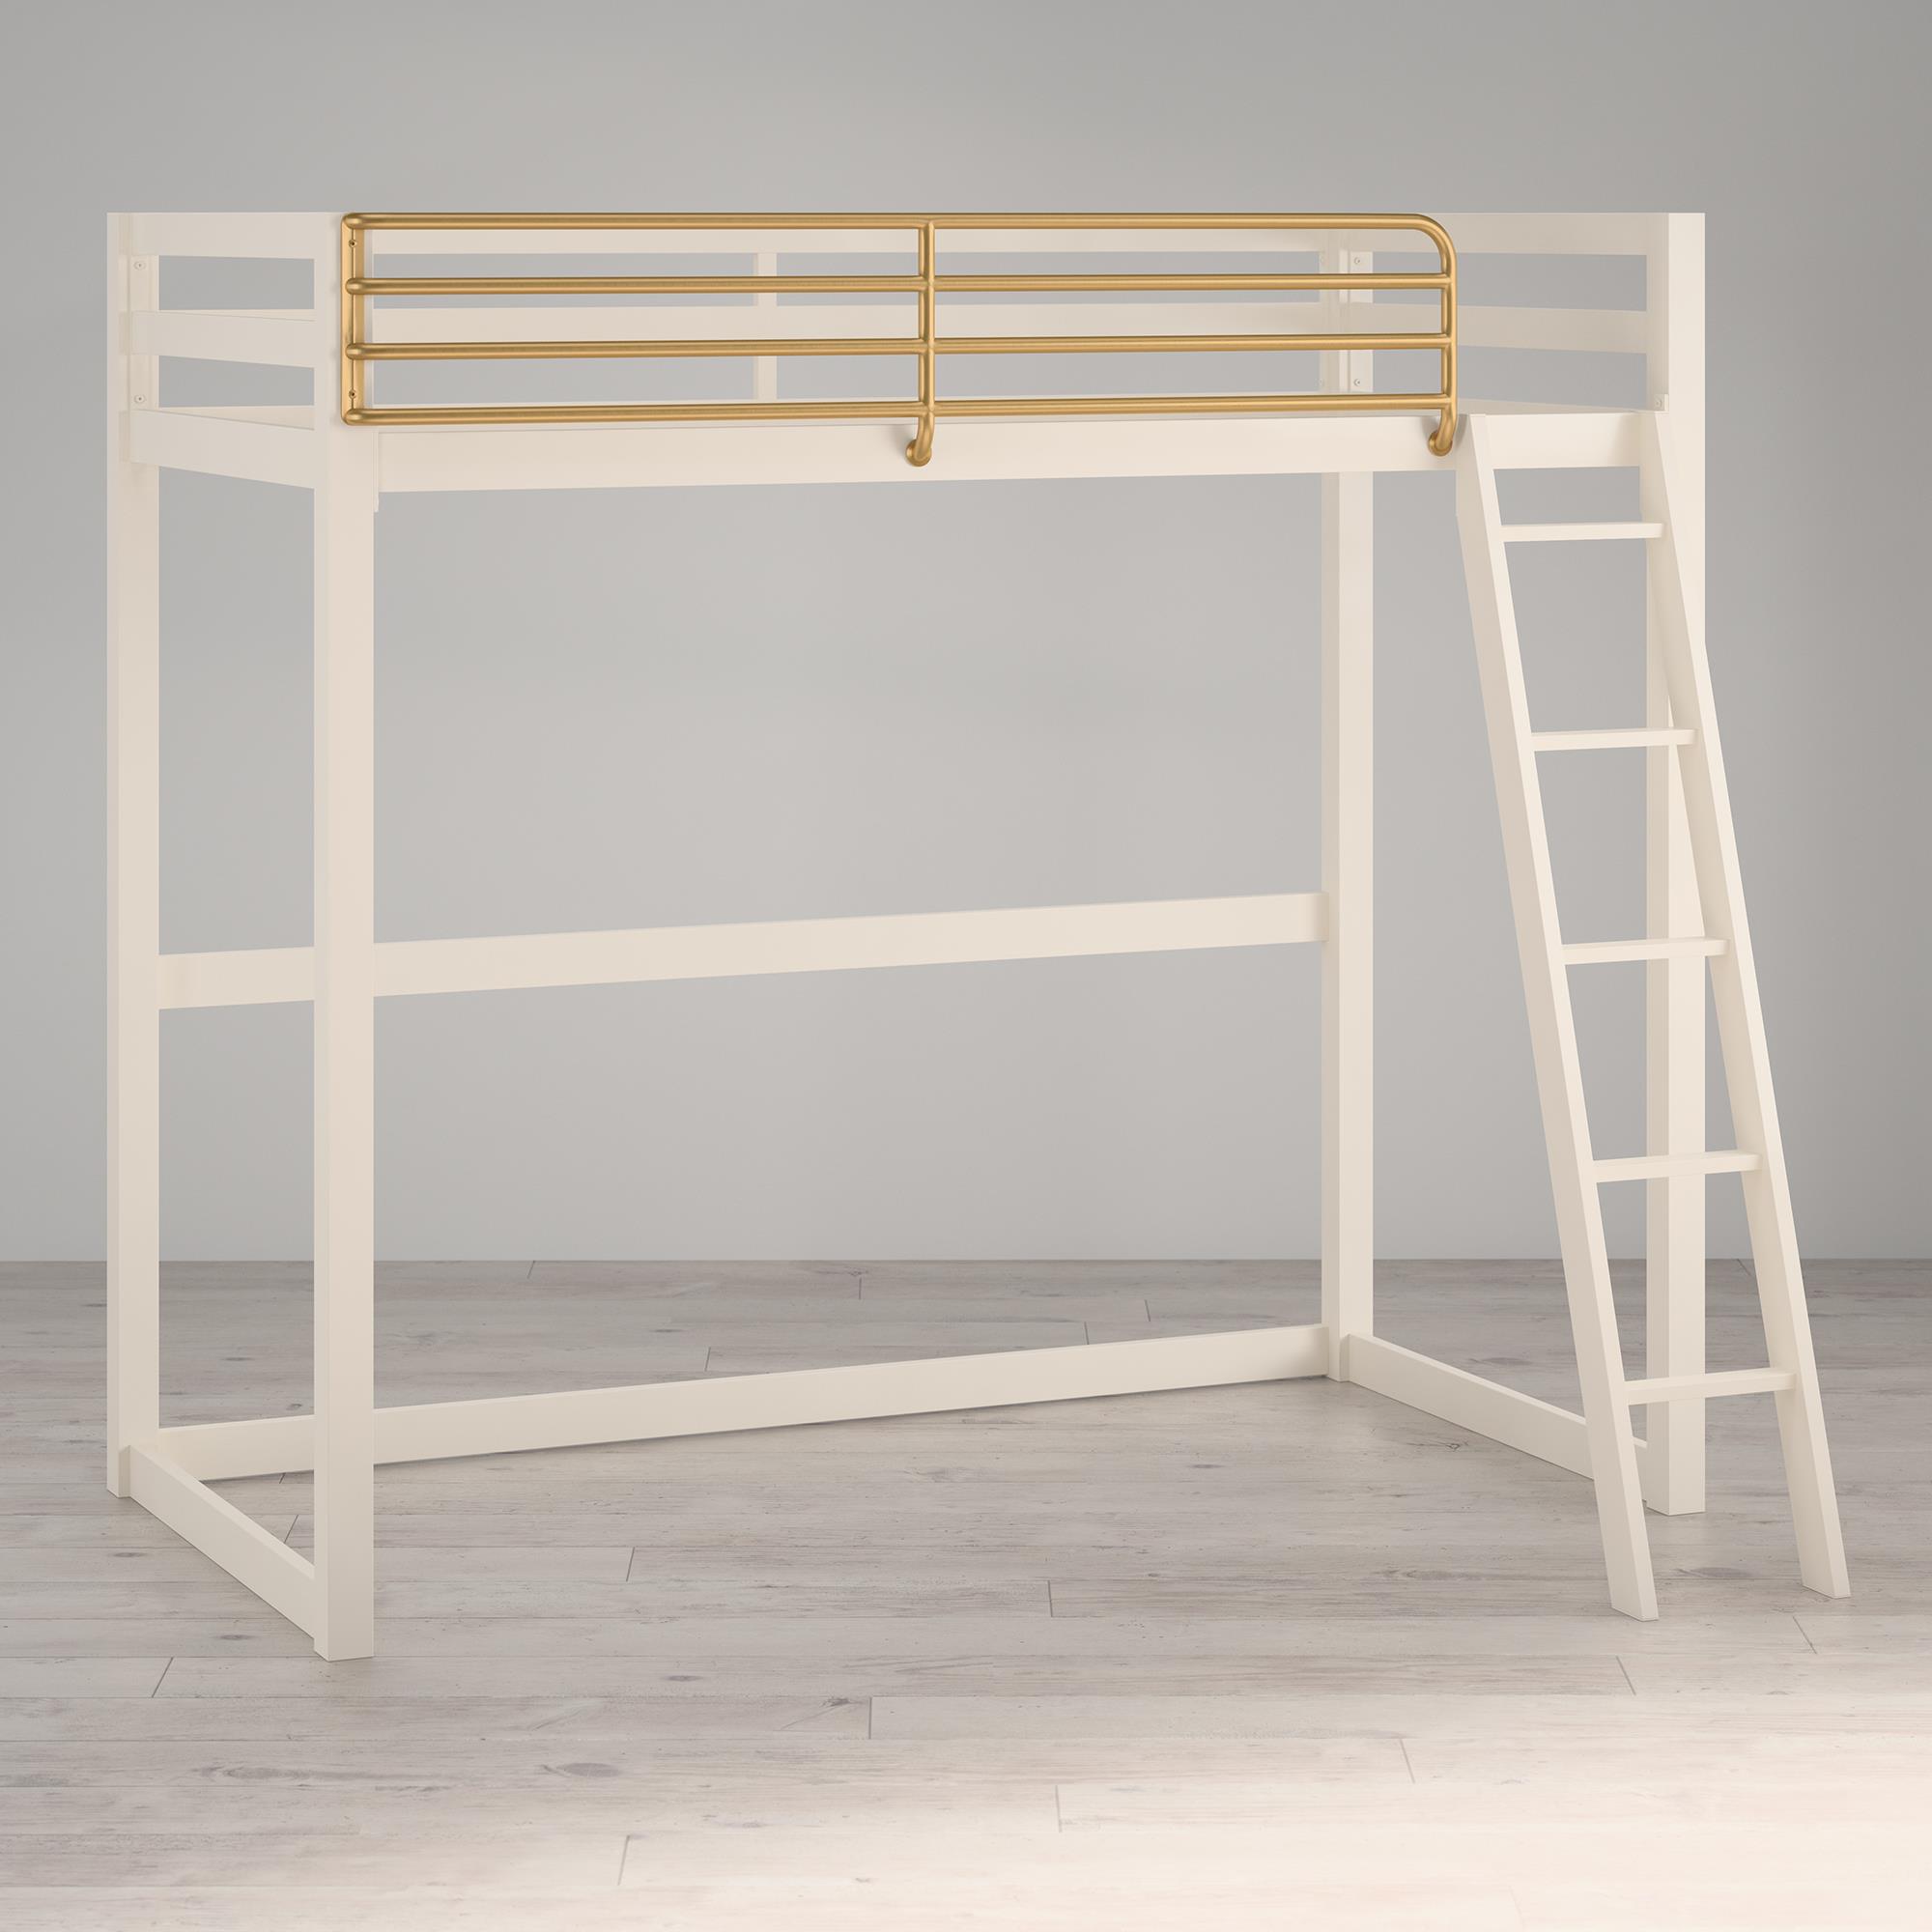 Little Seeds Monarch Hill Haven Twin Metal Loft Bed, White & Gold Bars - image 4 of 12